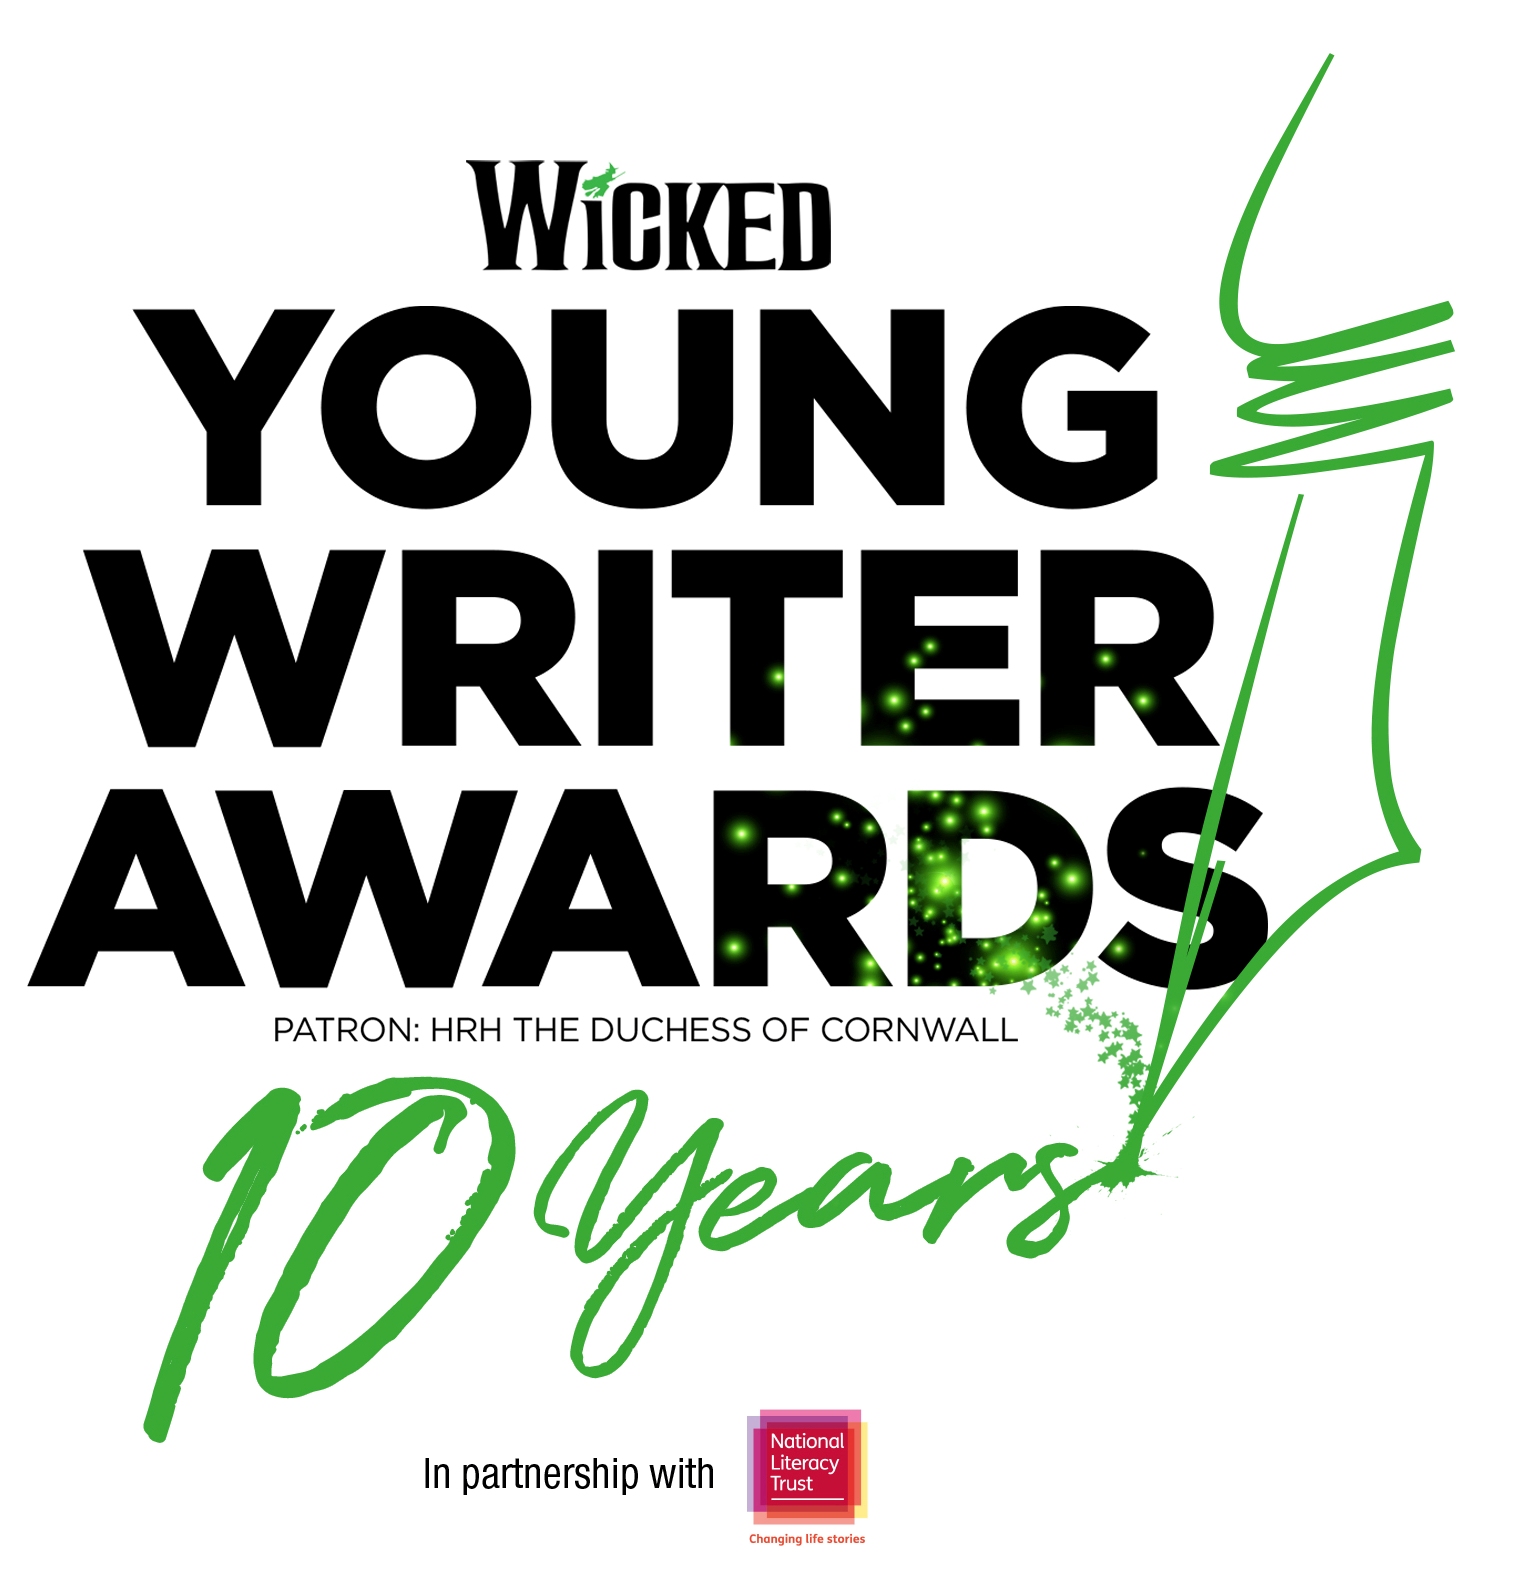 The Wicked Young Writer Awards